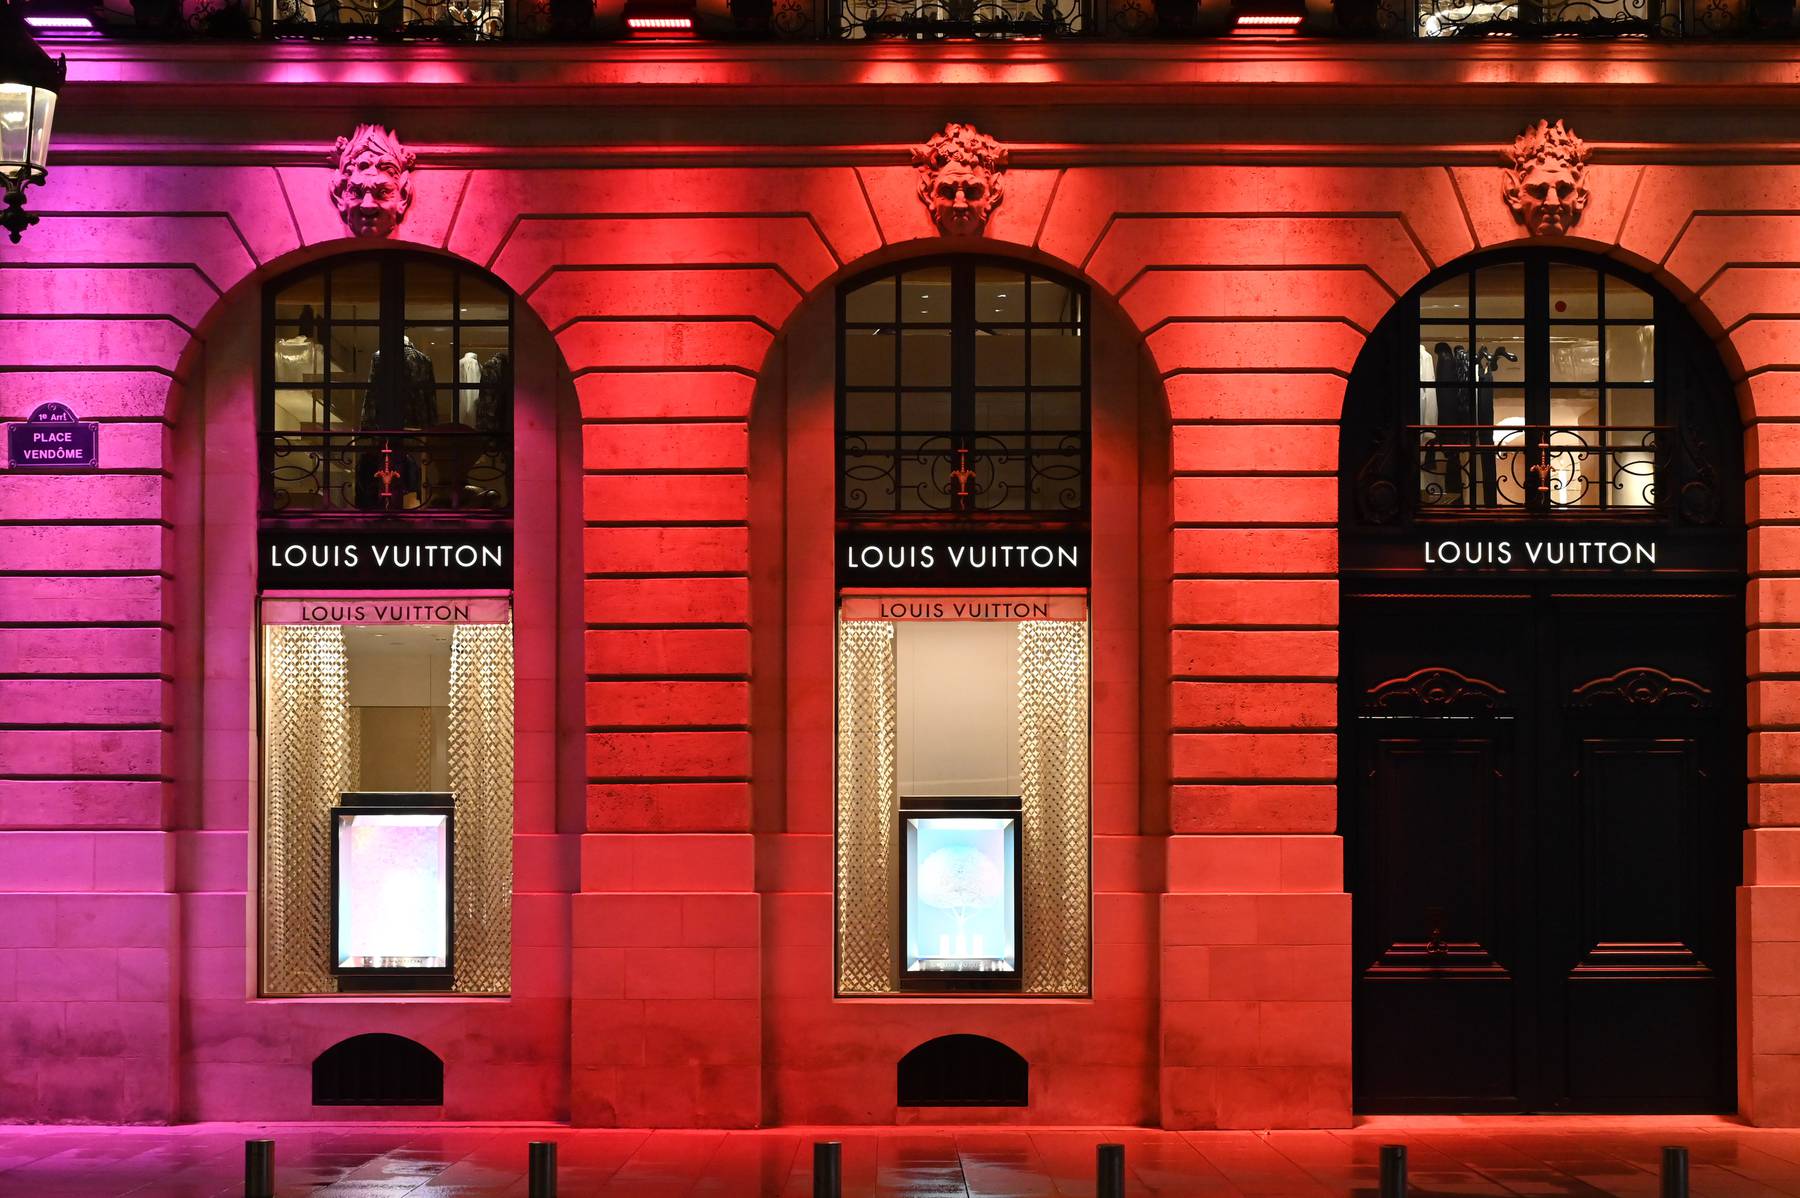 The facade of the Louis Vuitton store in Paris, France